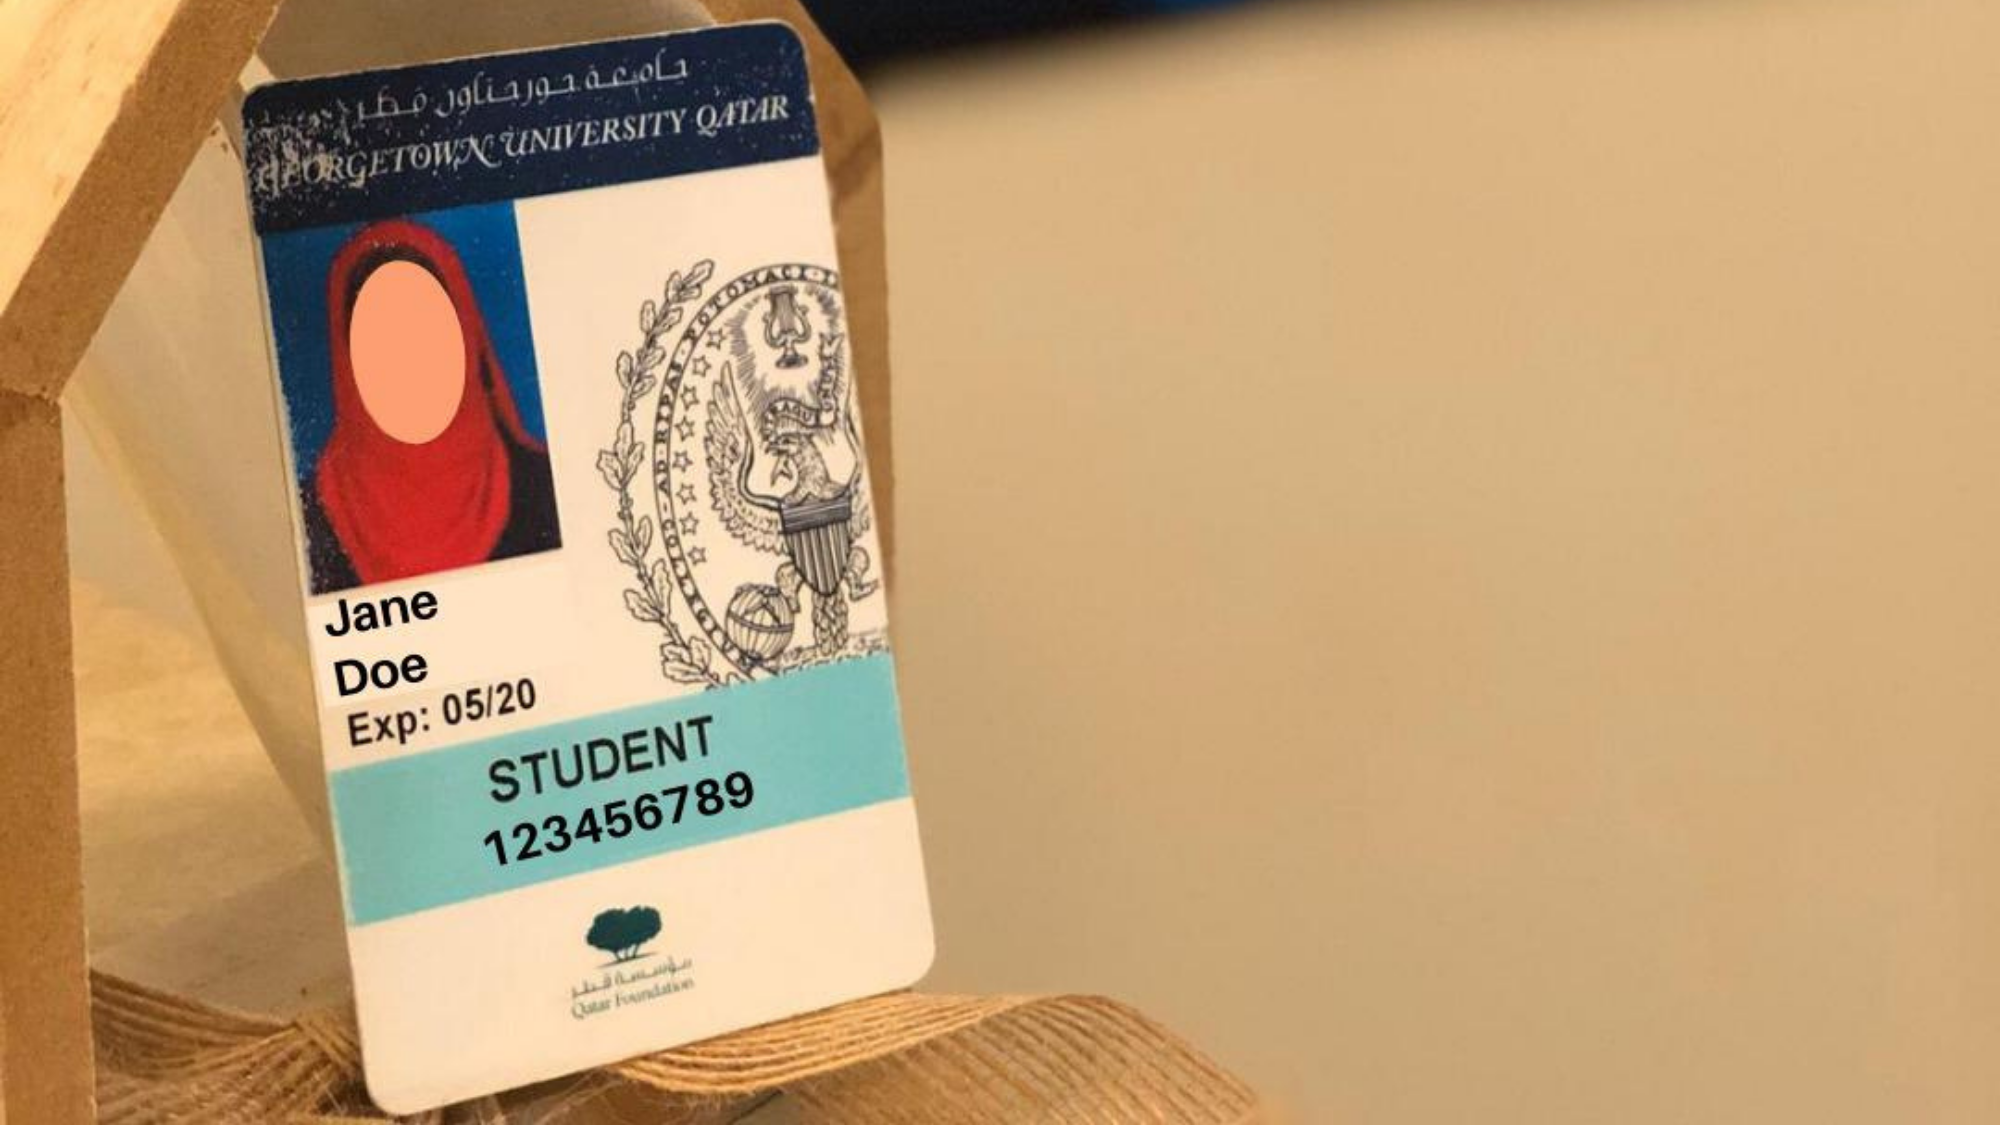 Picture of a student ID card, with the name "Jane Doe" and ID number 12345678, angled on a wooden pentagonal block. There is a blurred Georgetown Poster in the background.